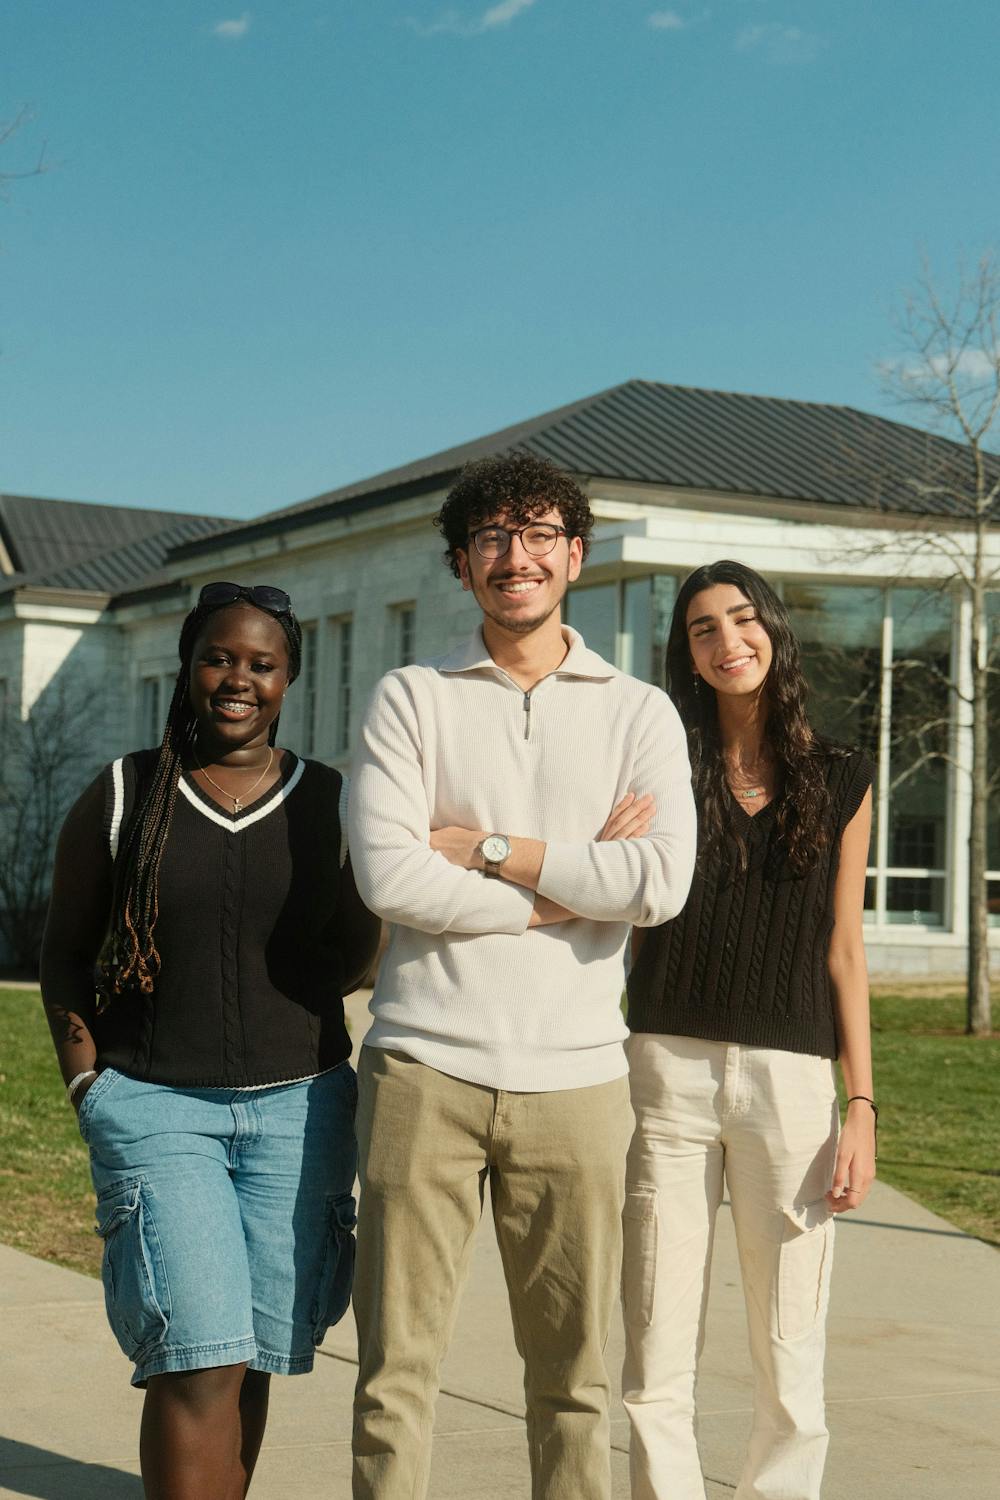 Abed Abbas ’24 (center) was elected to serve as Student Government Association President beginning next fall, alongside Vice Presidents Fanta Diop ’25 (left) and Tara Masri ’25 (right).